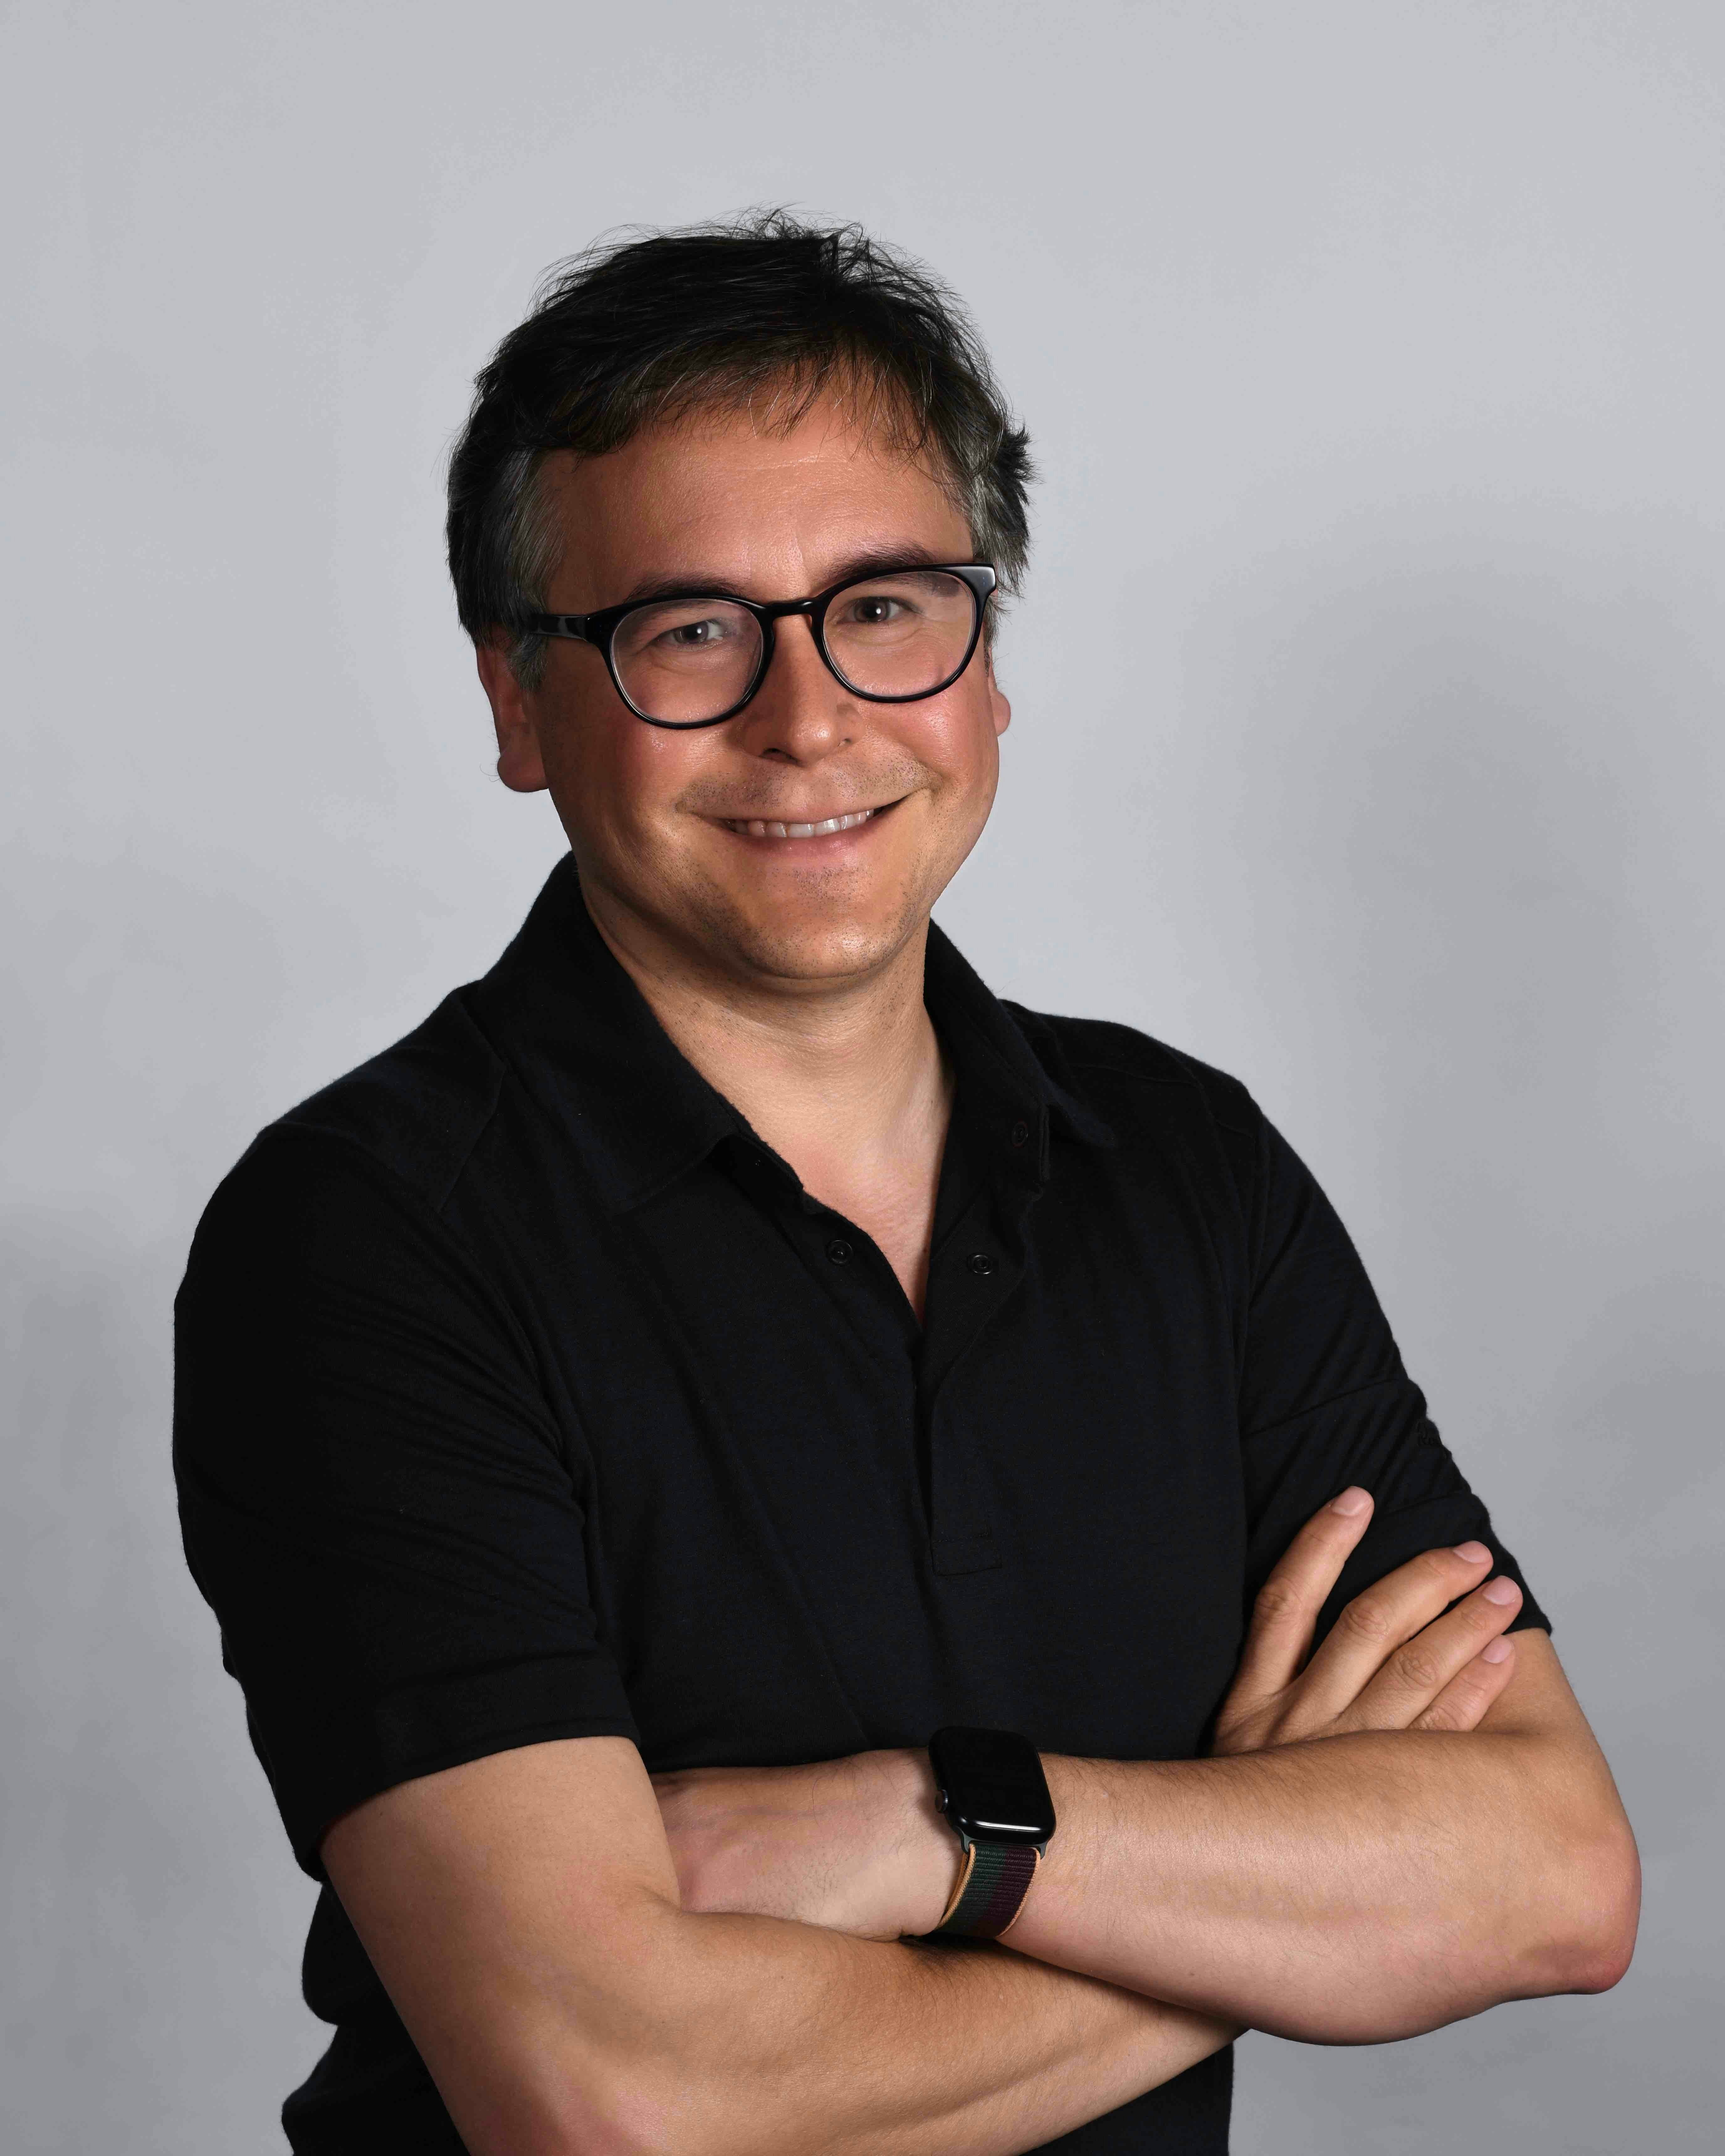 Luis Ceze Chief Executive Officer, Co-Founder